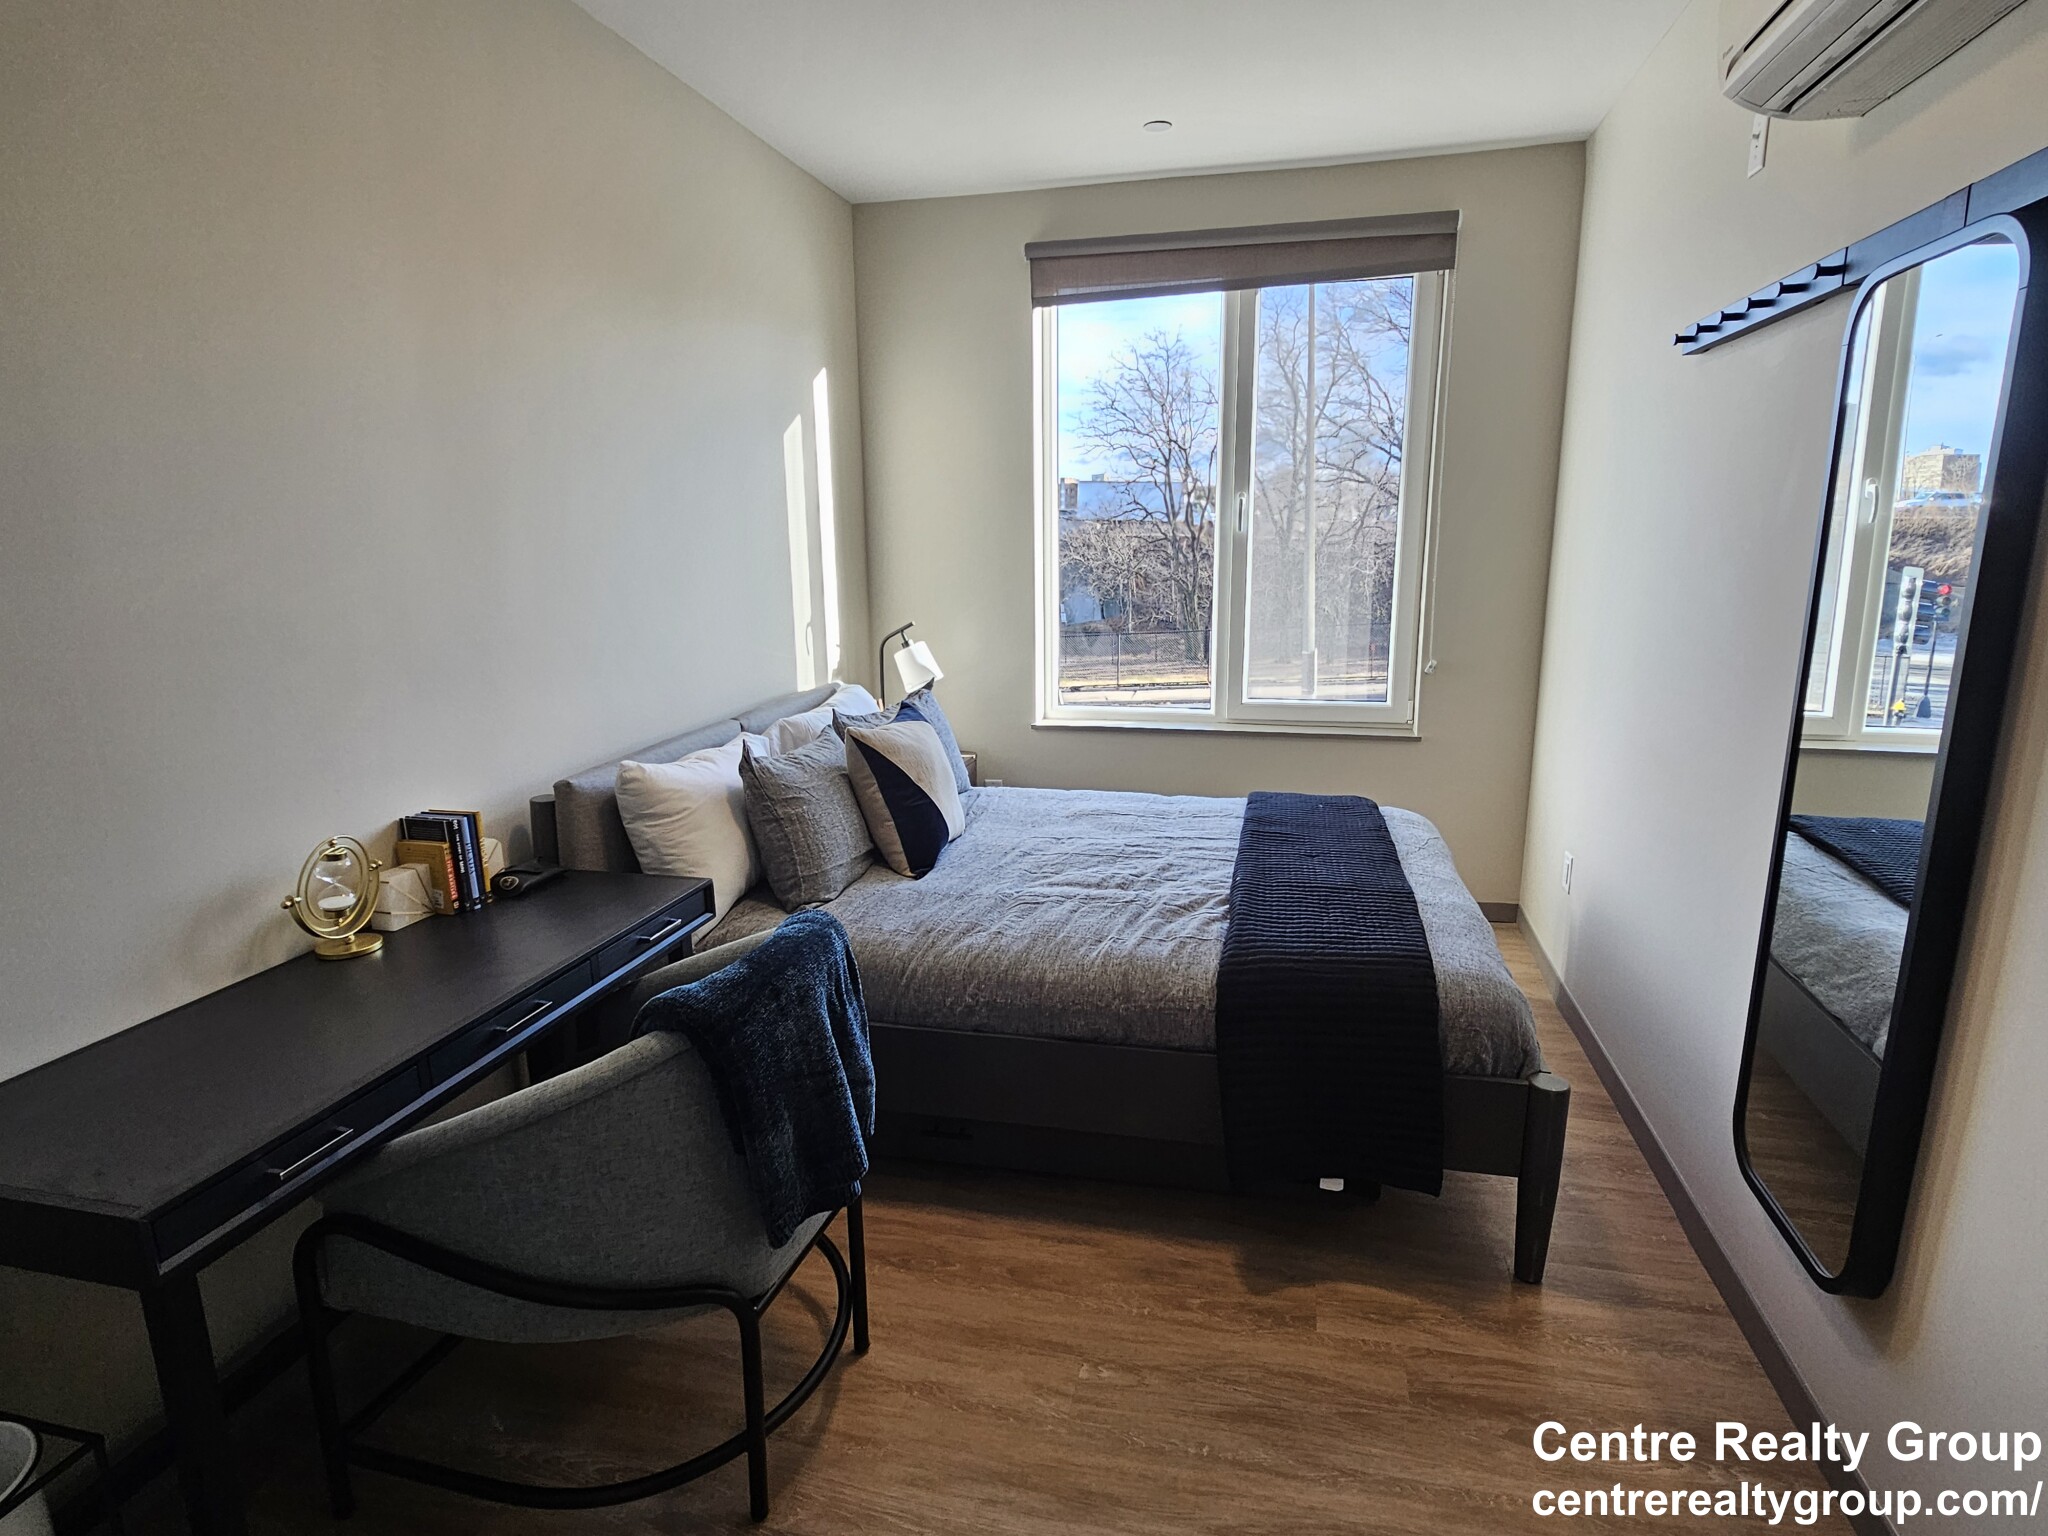 Photos of apartment on Lincoln St.,Boston MA 02134